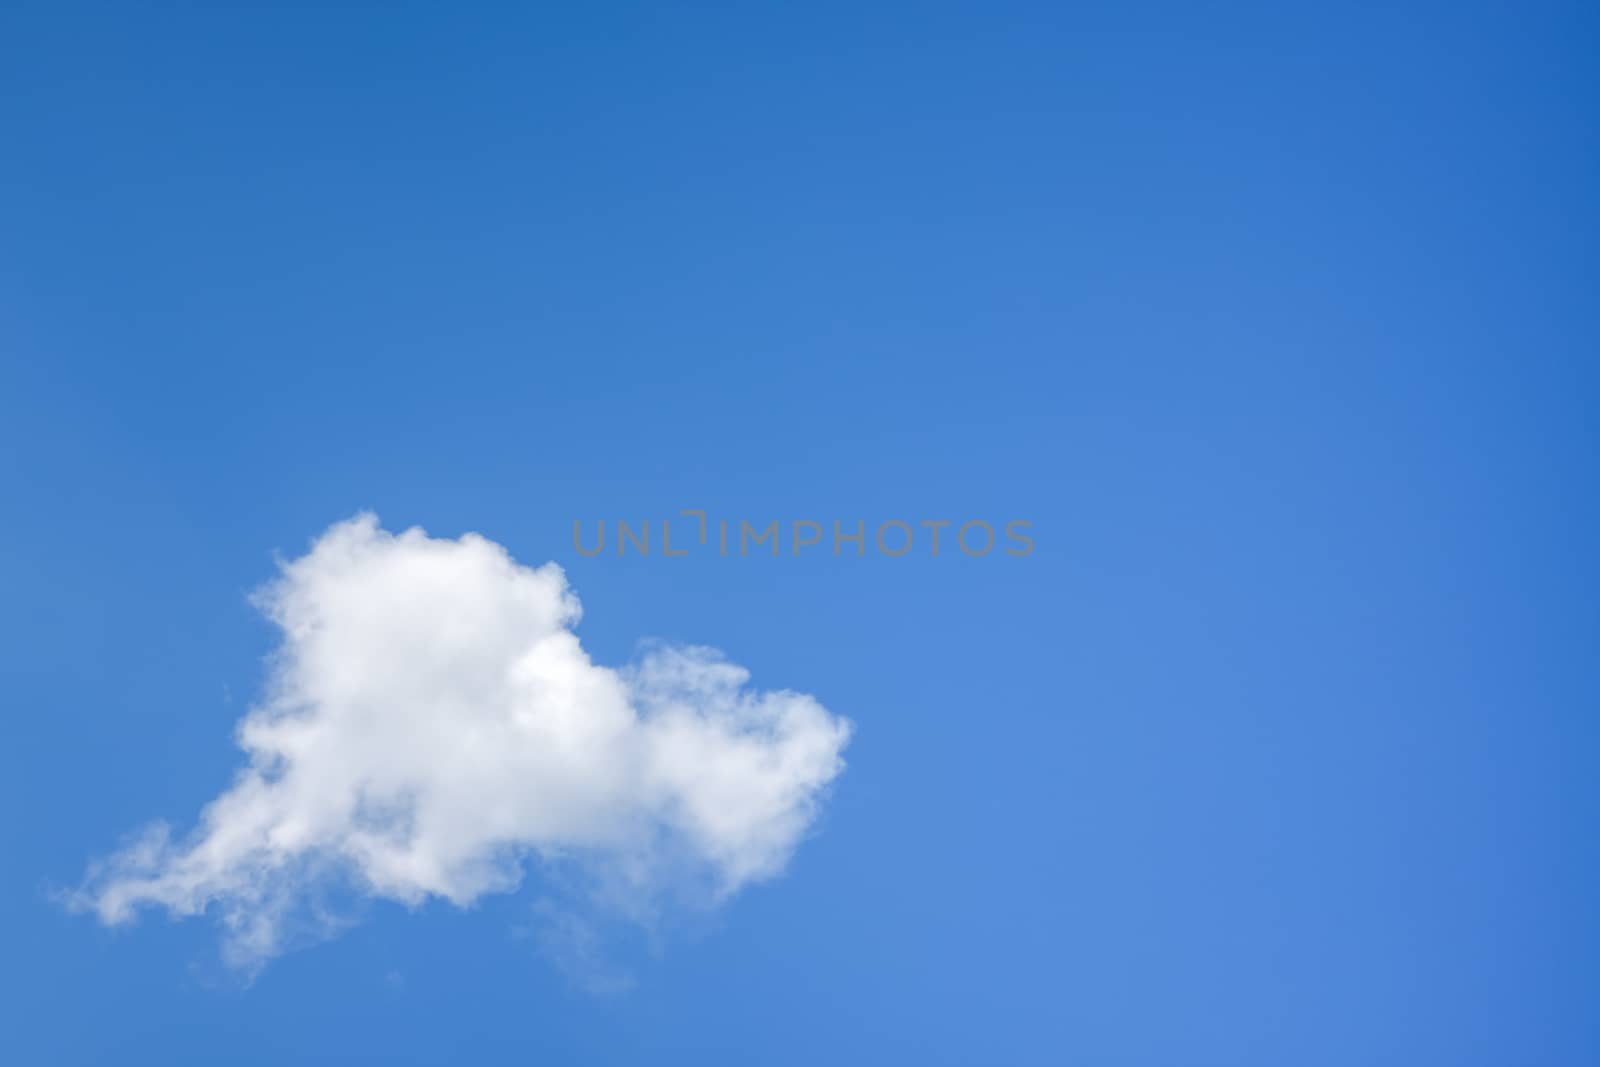 An image of a single cloud in the blue sky background